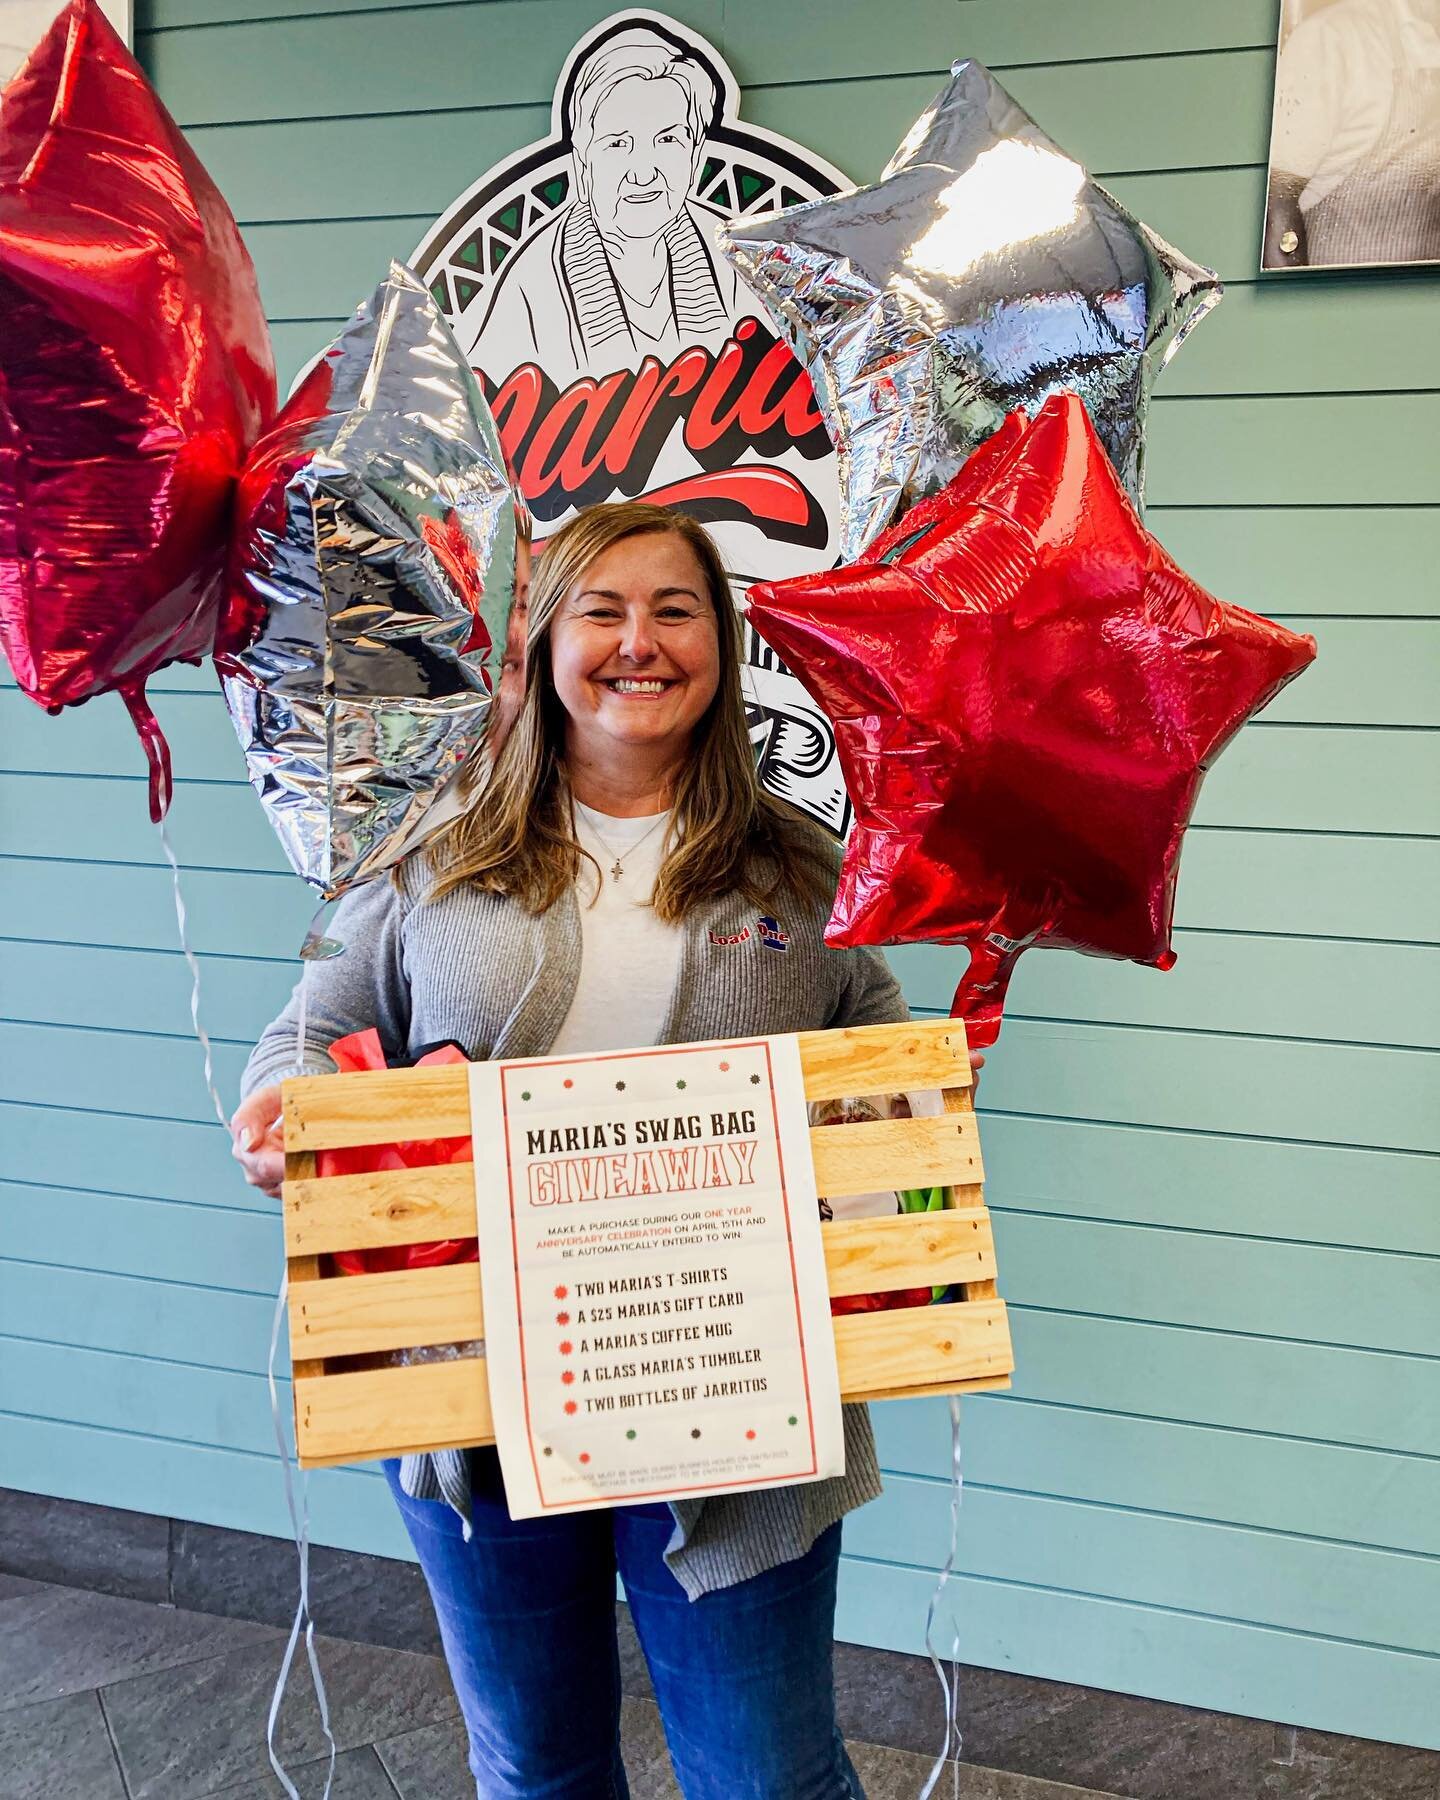 A huge CONGRATS to Mindy on winning our Maria&rsquo;s Swag Bag from our ONE YEAR anniversary! 😍👏
&bull;
&bull;
&bull;
#mexicanfood #mexicanrestaurant #downrivermichigan #tacos #tacosarelife
#authenticmexican #foodie #detroitfoodie #detroit #texmex 